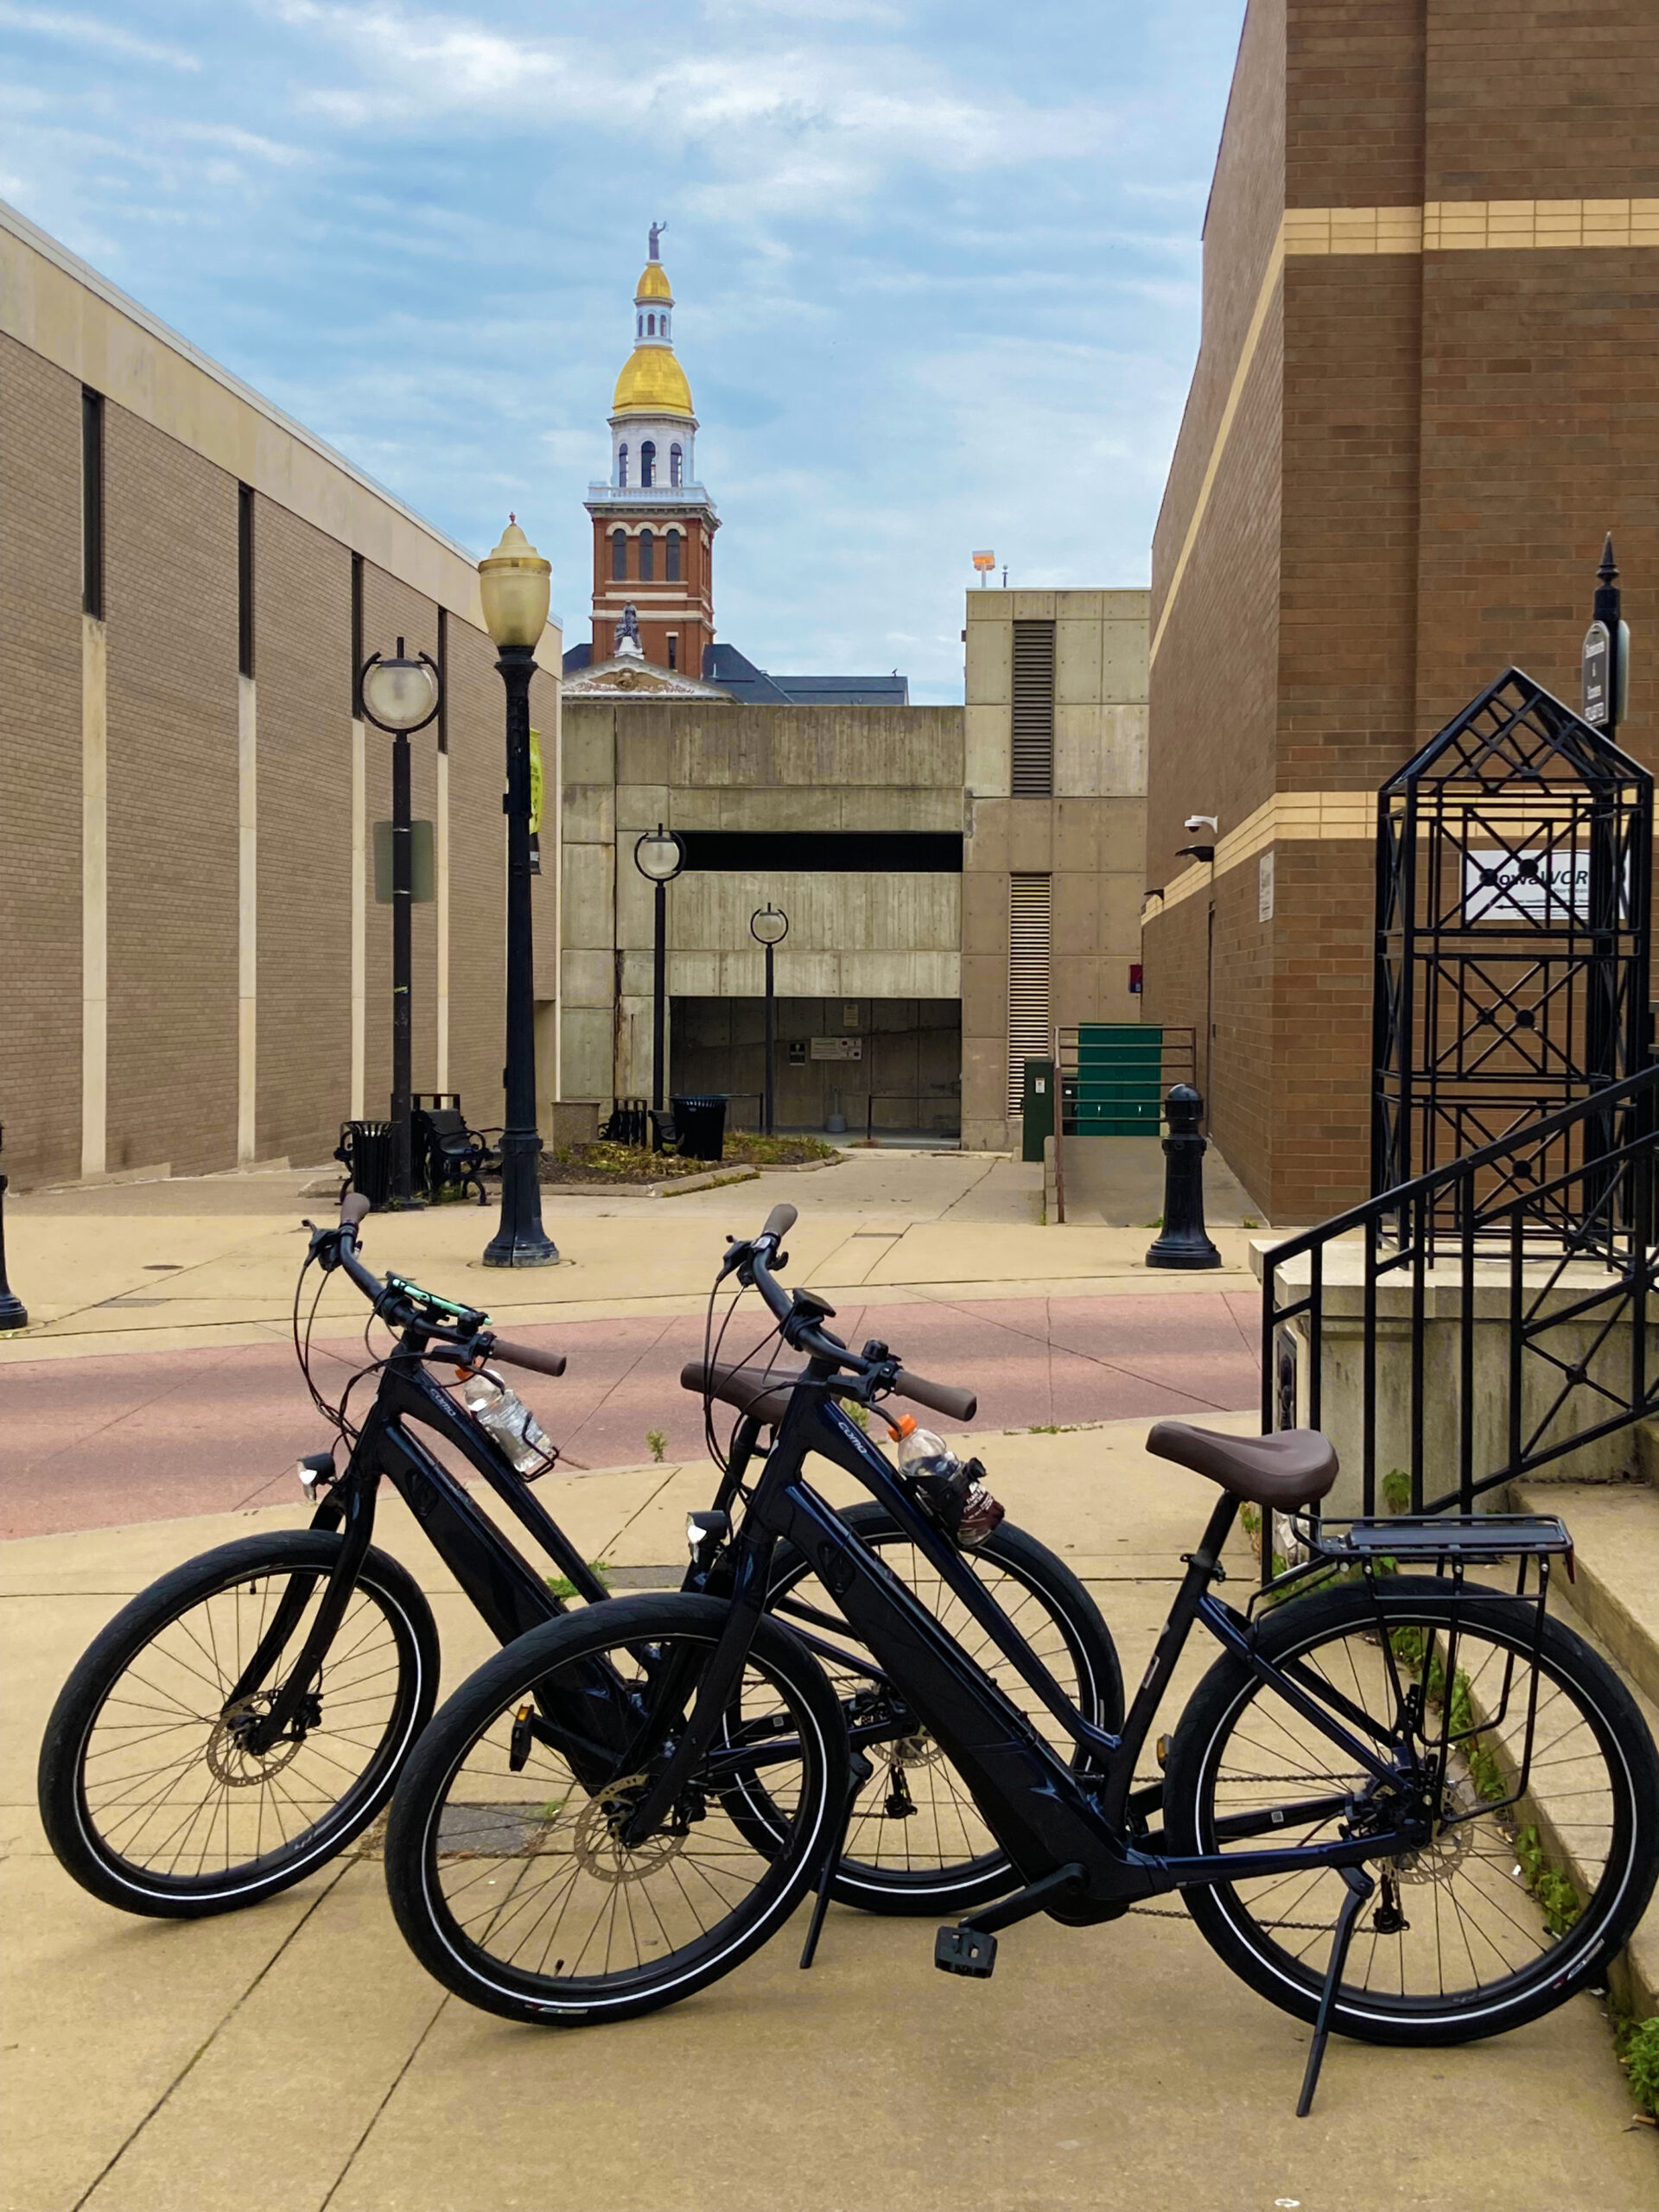 Parked Electric Bikes by the Town Clock in Dubuque, Iowa